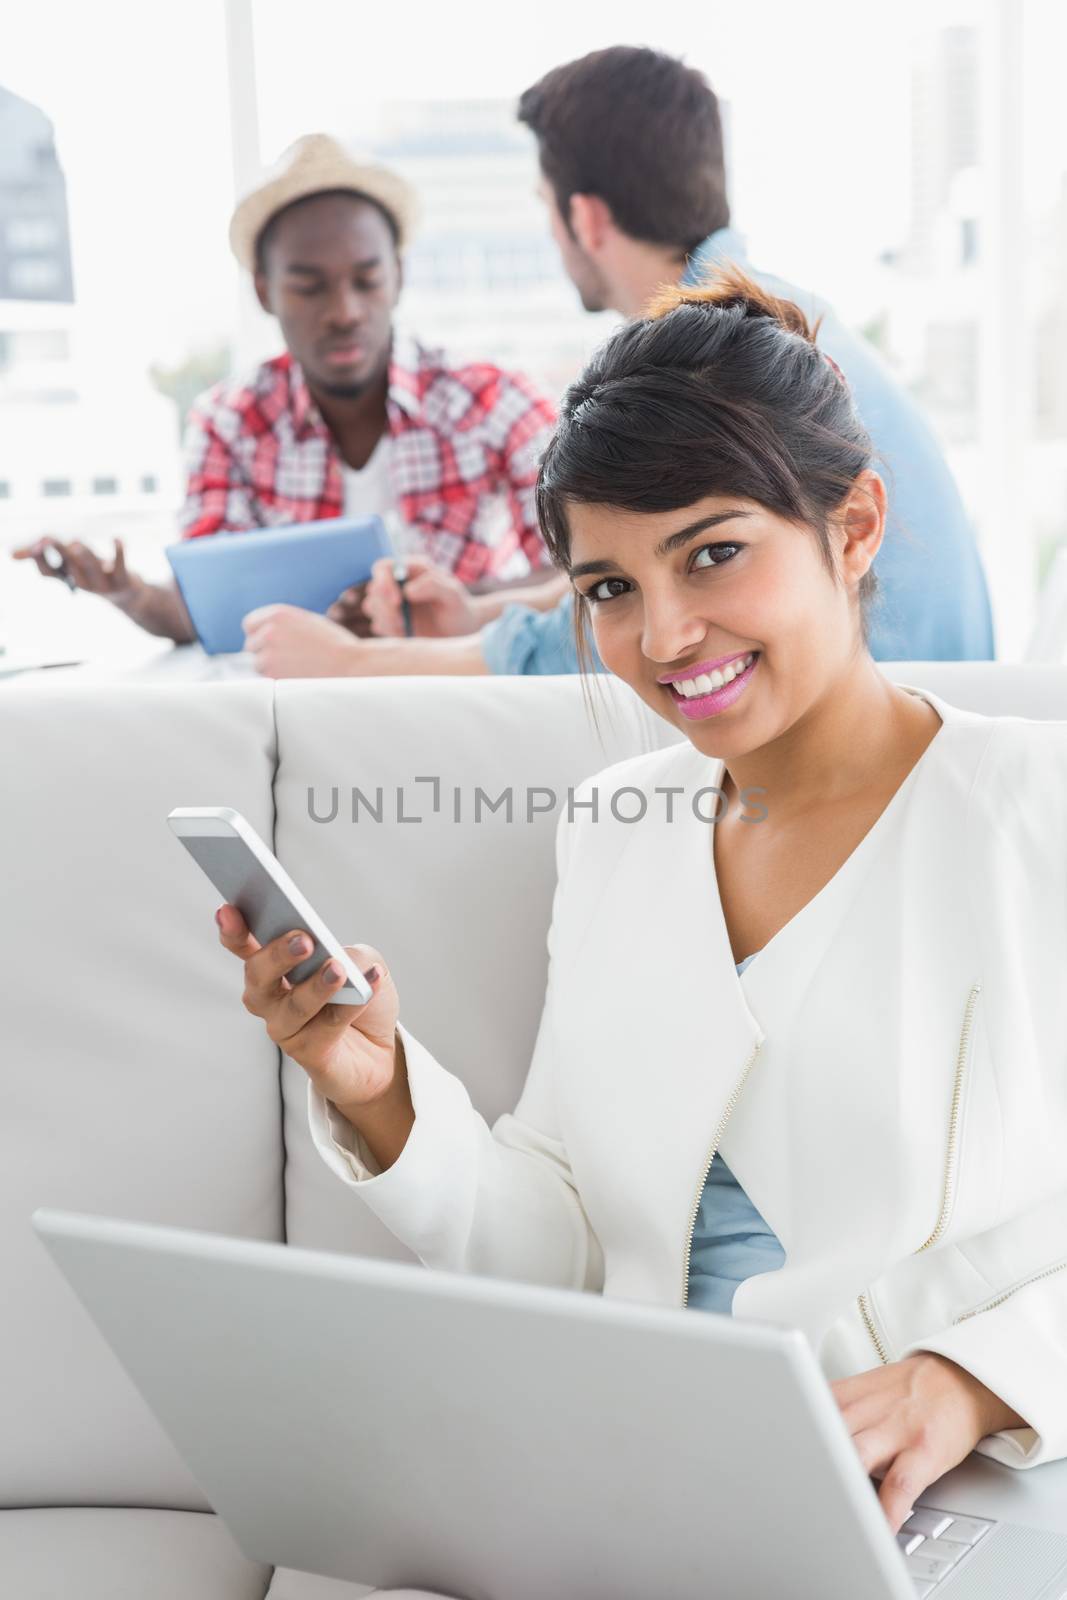 Smiling businesswoman using mobile and laptop on couch with colleagues behind her